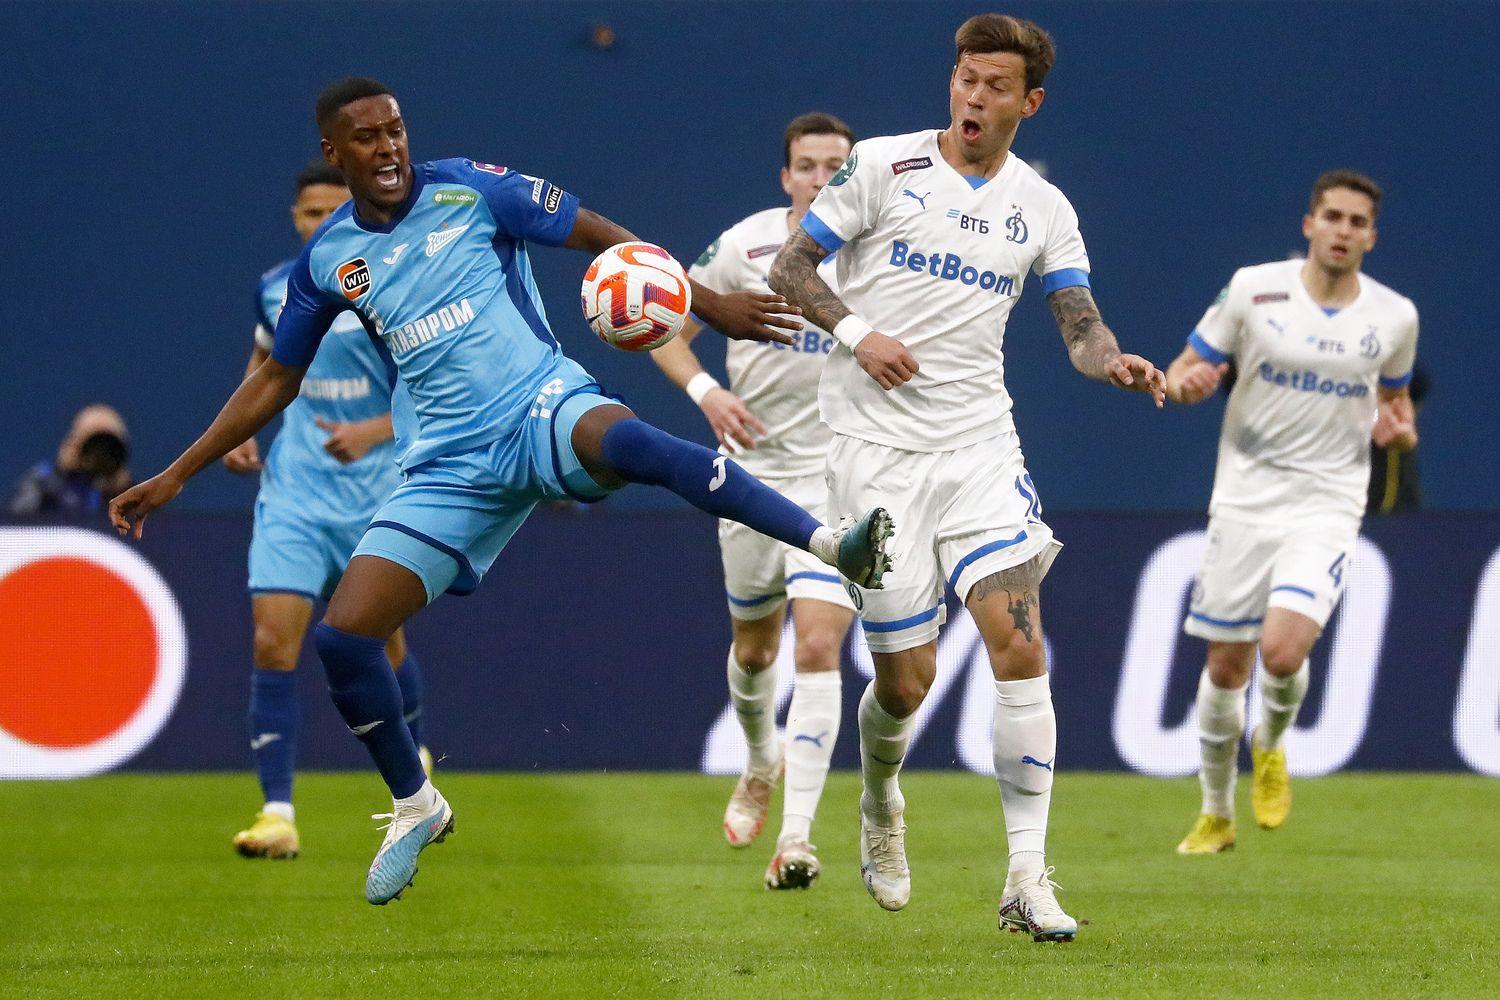 Double and Malcolm's assist: how Zenit defeated Dynamo in the RPL match